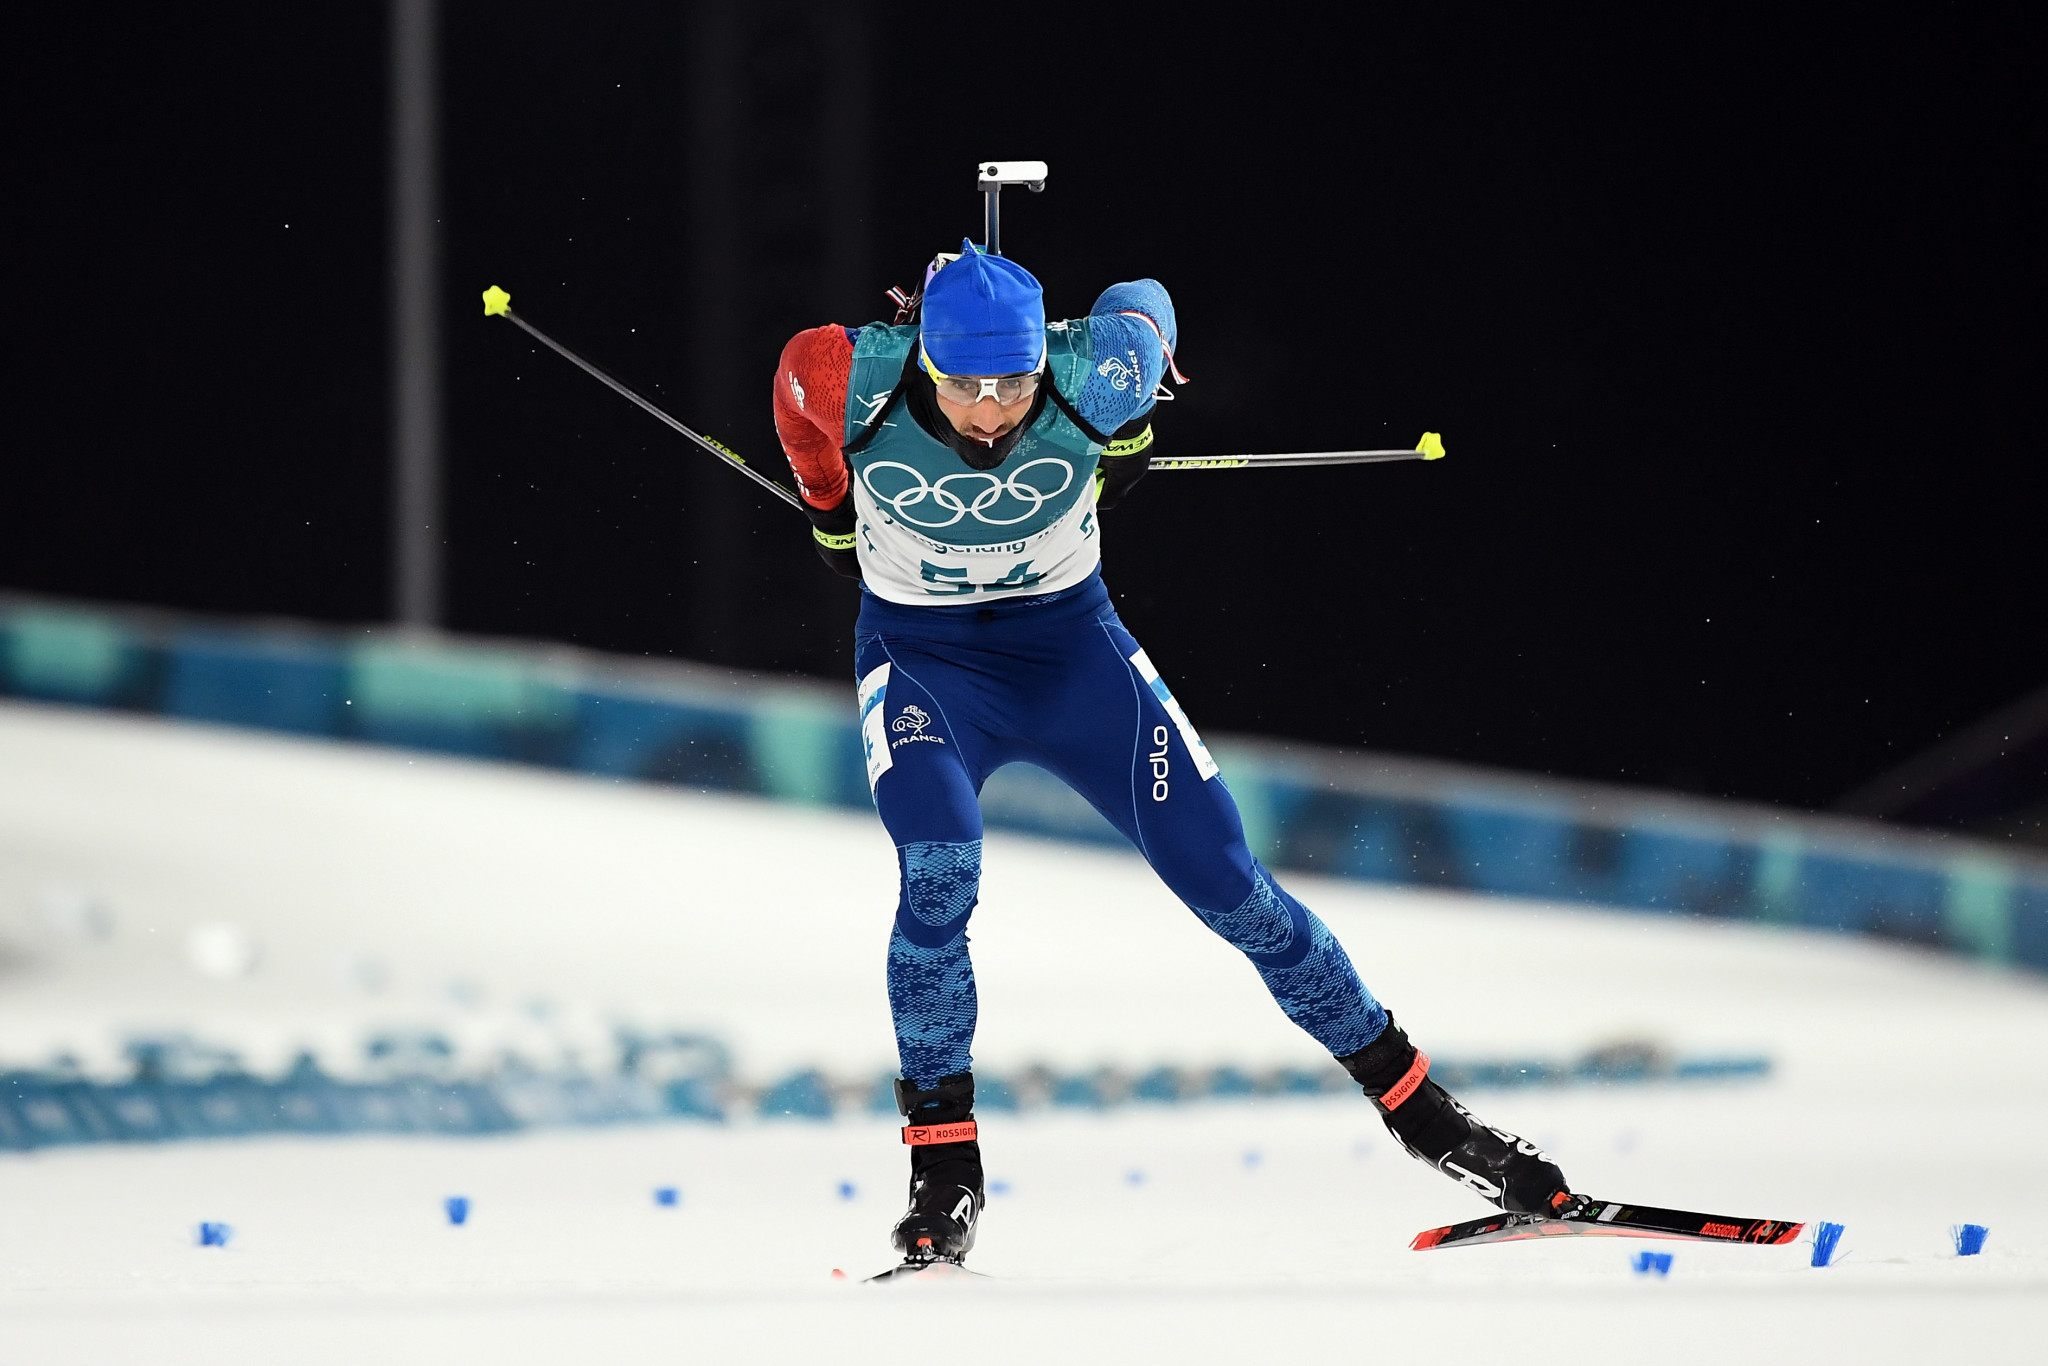 France's Martin Fourcade missed three targets early on to end any realistic hope of a medal ©Getty Images